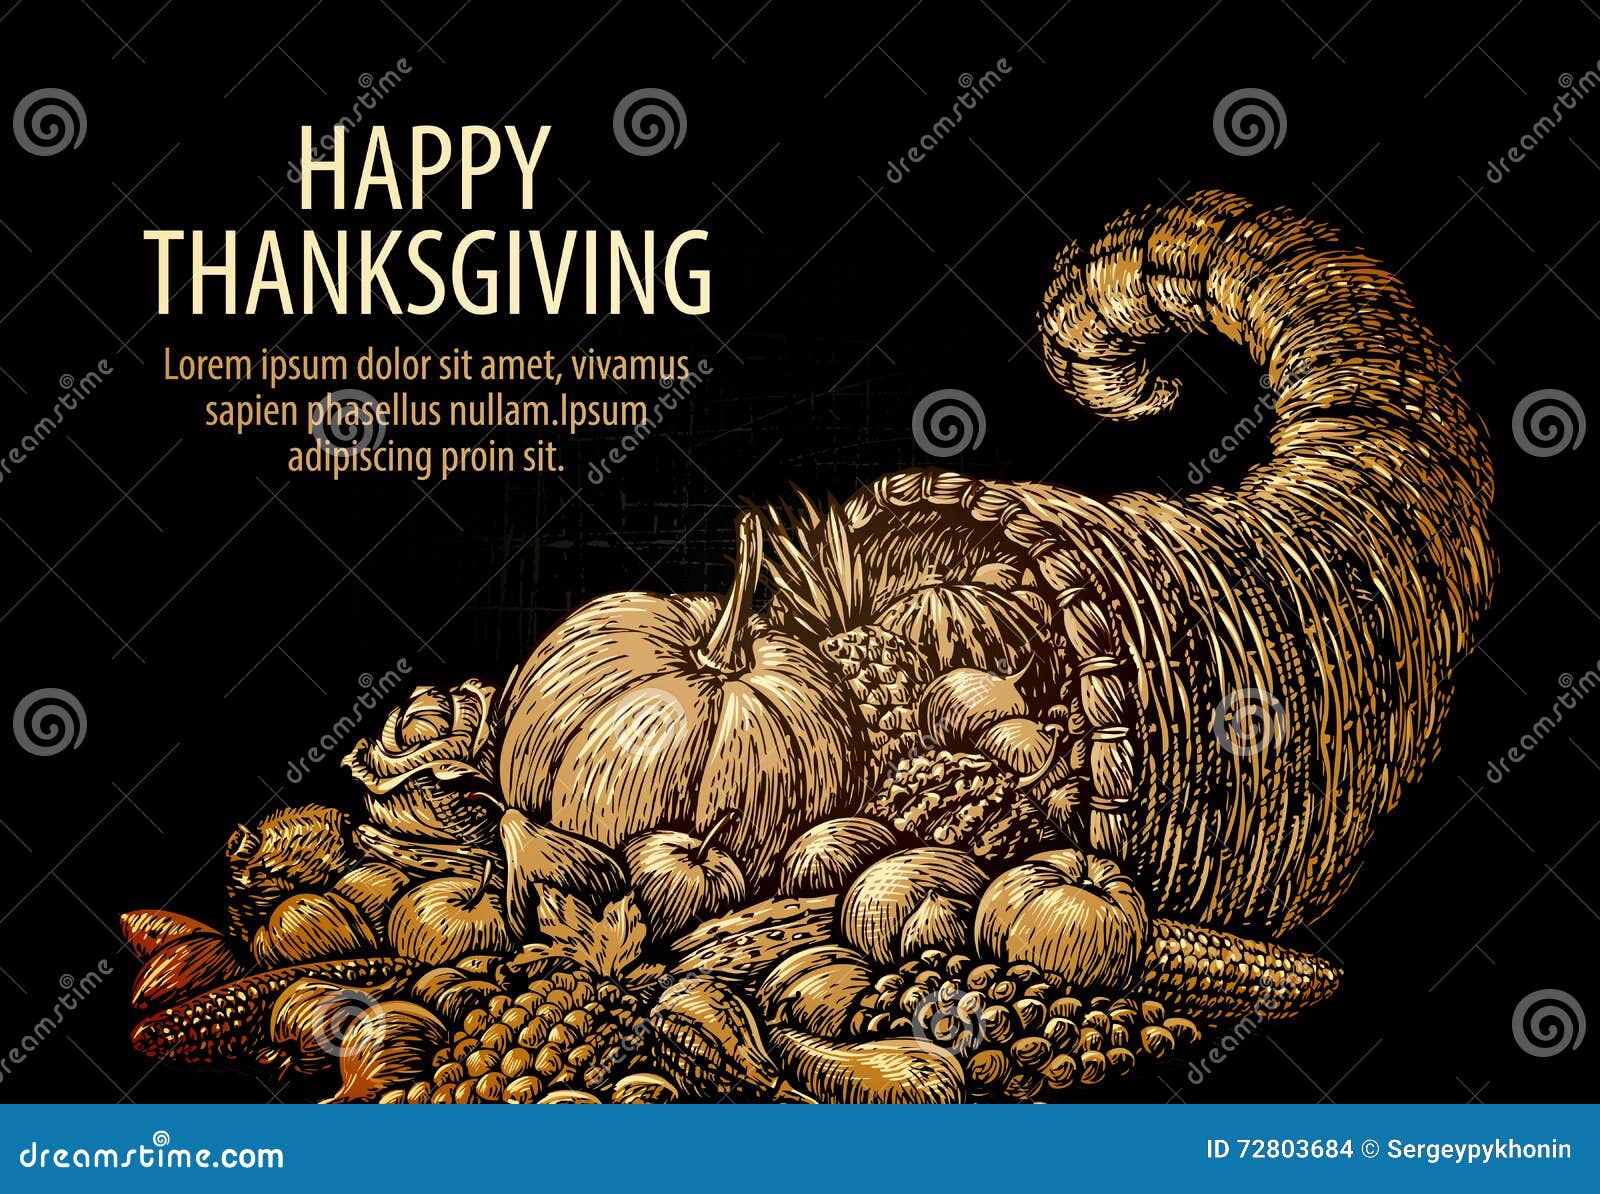 happy thanksgiving. horn of plenty. cornucopia with fruits and vegetables